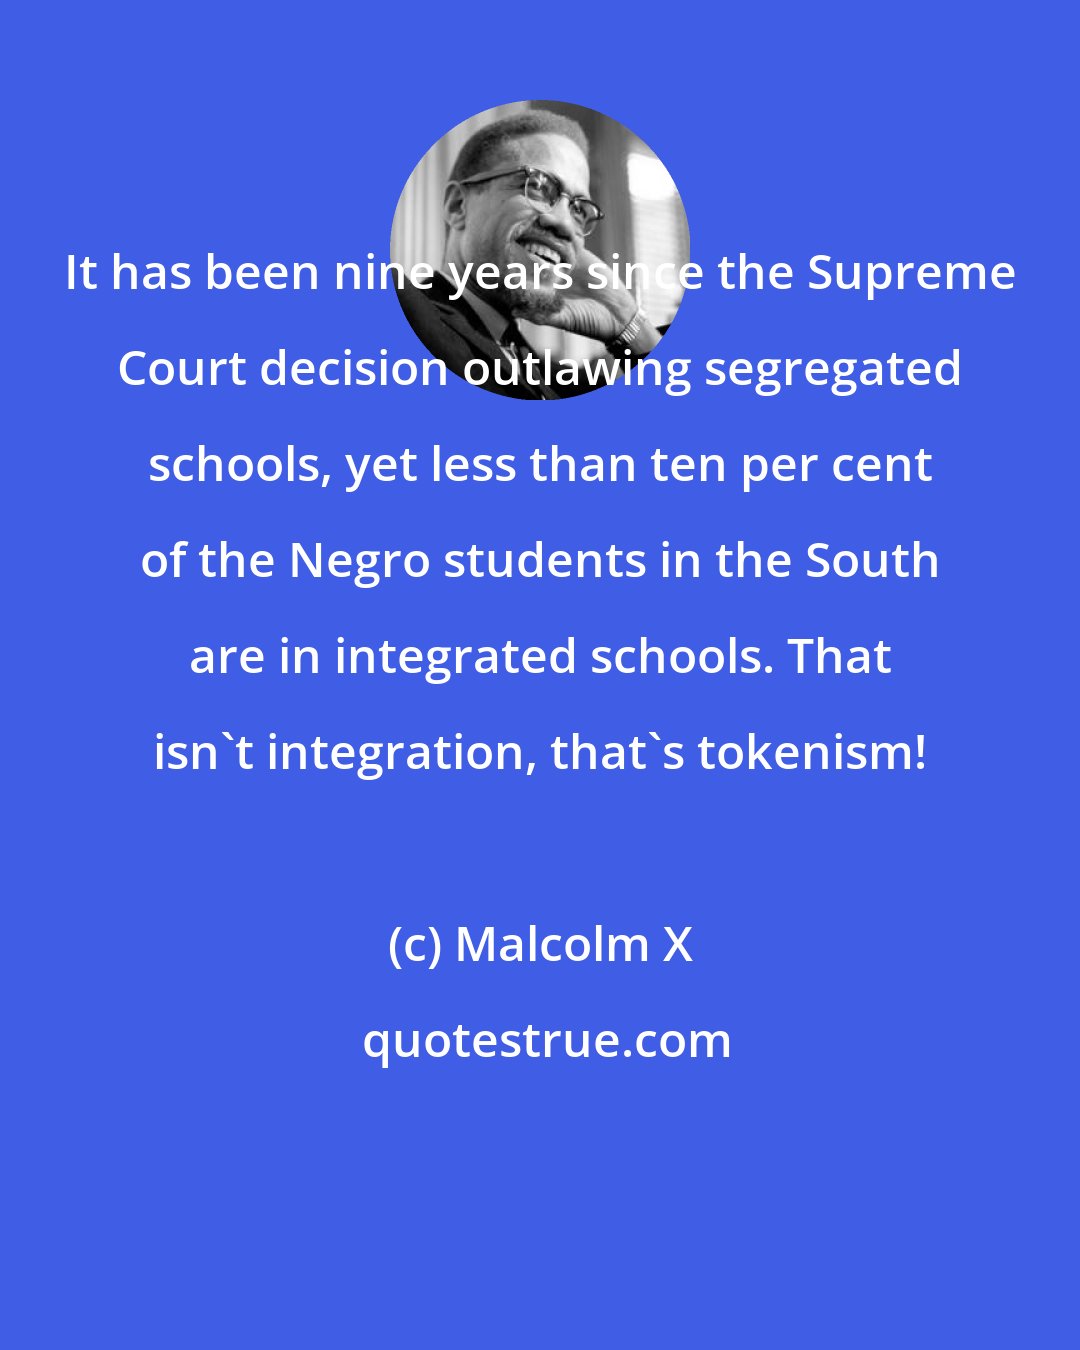 Malcolm X: It has been nine years since the Supreme Court decision outlawing segregated schools, yet less than ten per cent of the Negro students in the South are in integrated schools. That isn't integration, that's tokenism!